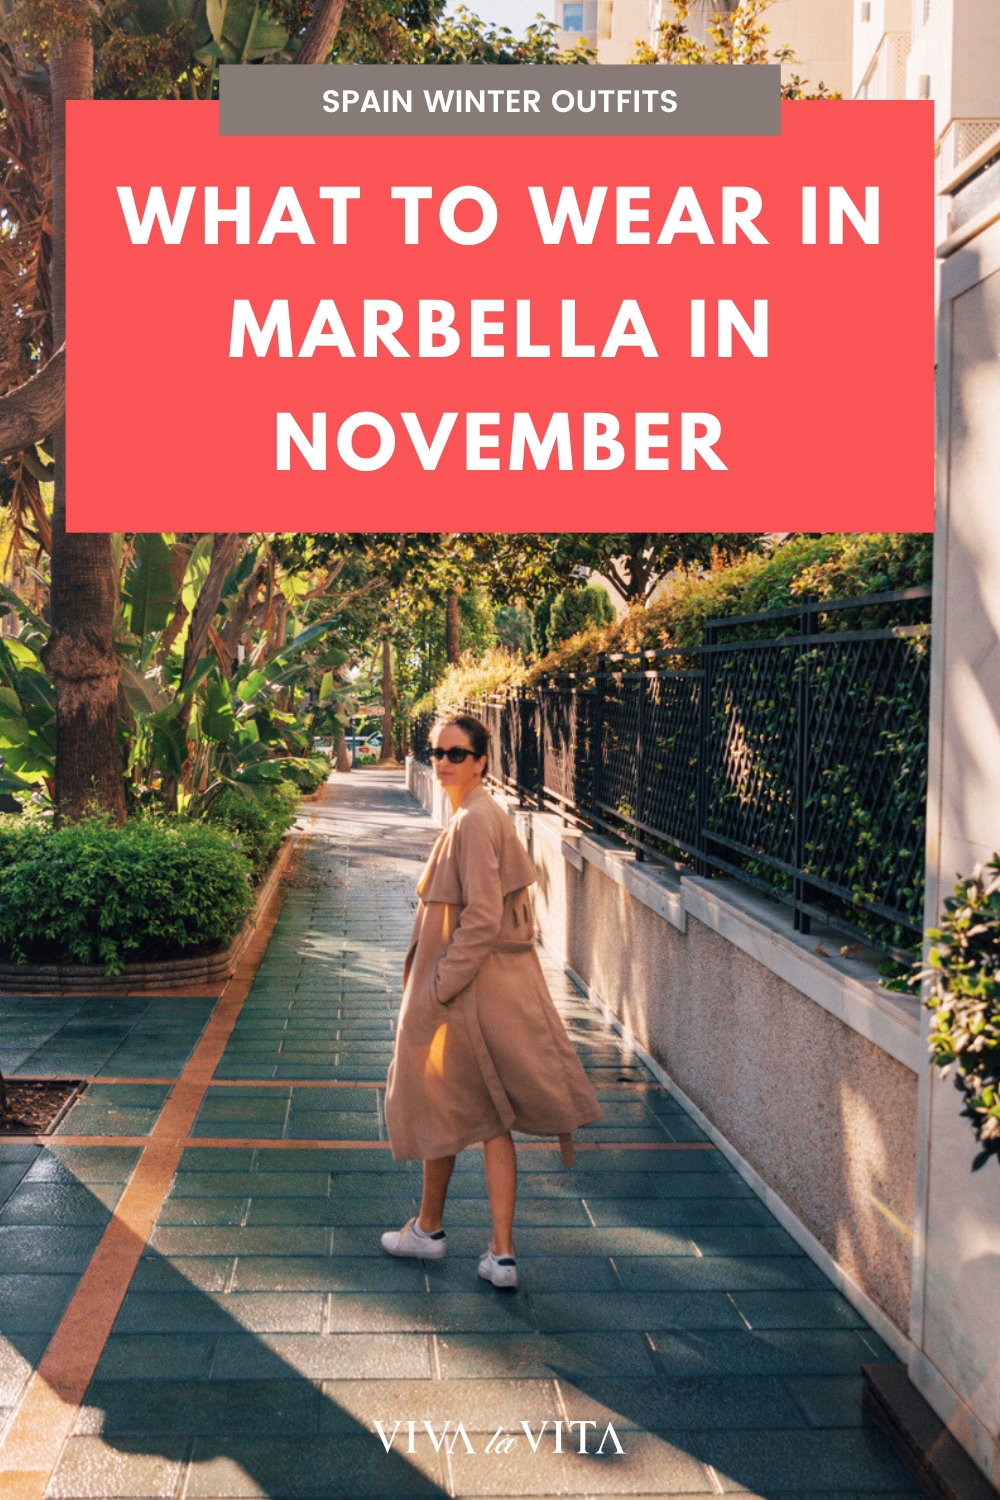 pin image for an article about what to wear in marbella in november